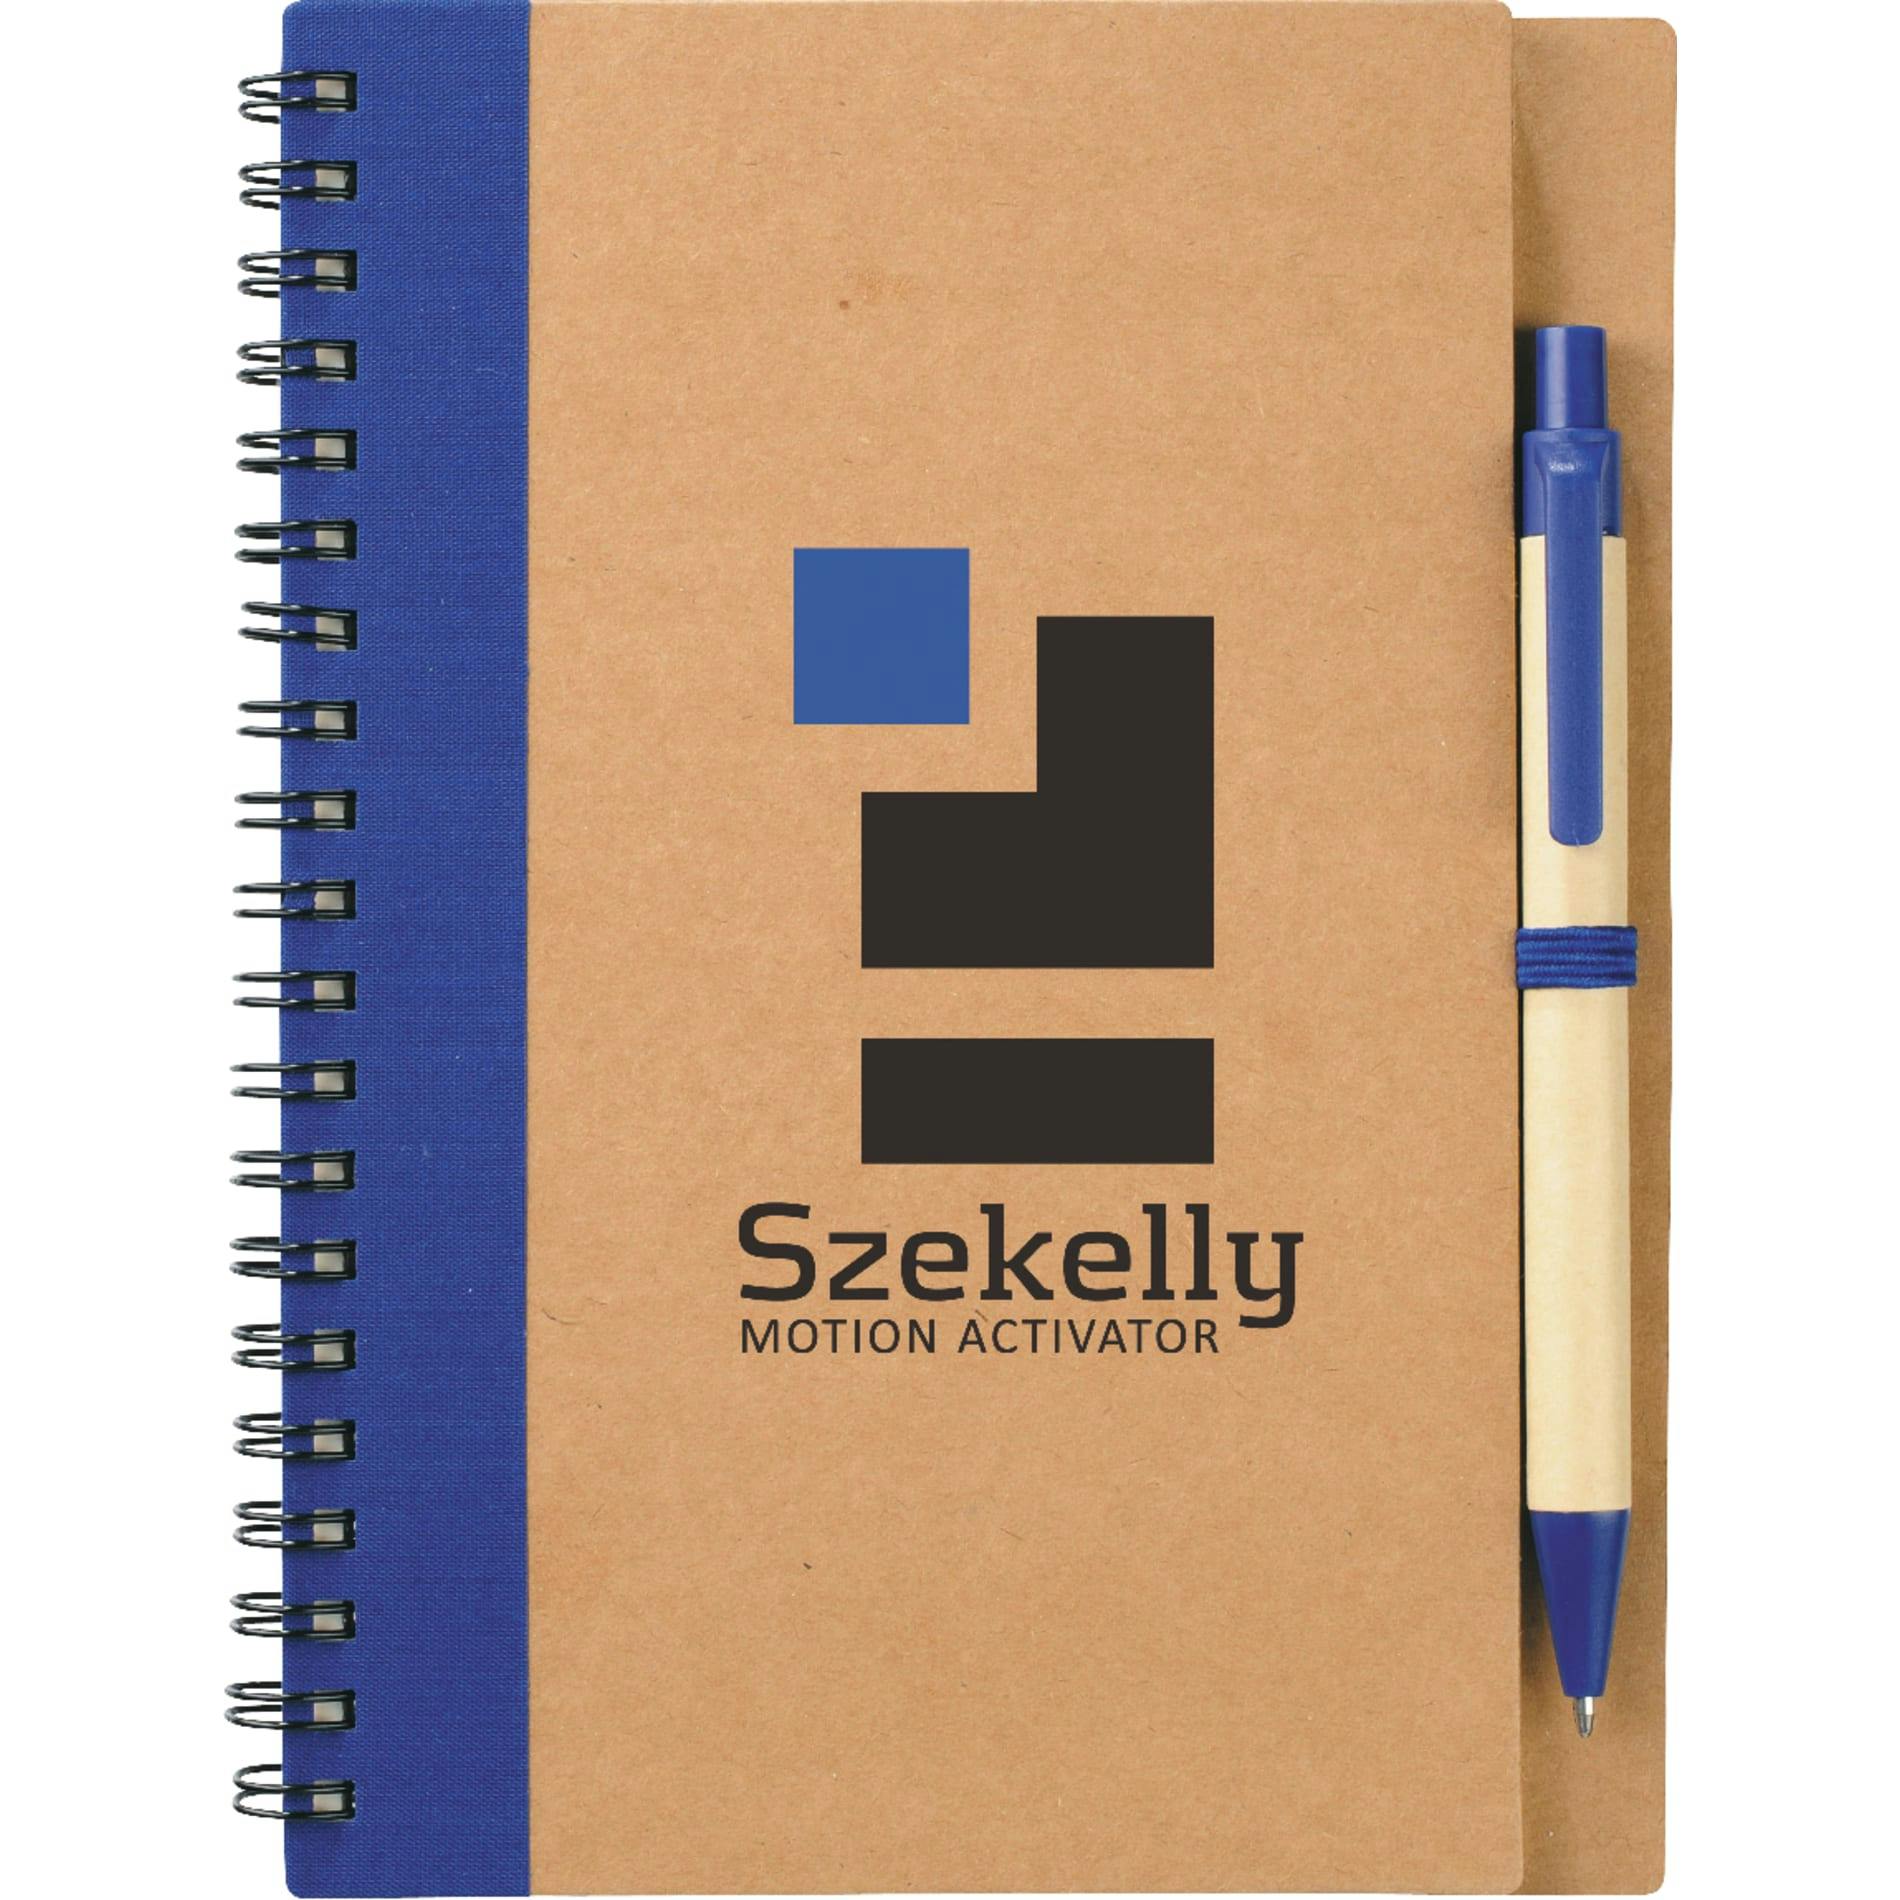 5" x 7" Eco Spiral Notebook with Pen - additional Image 1